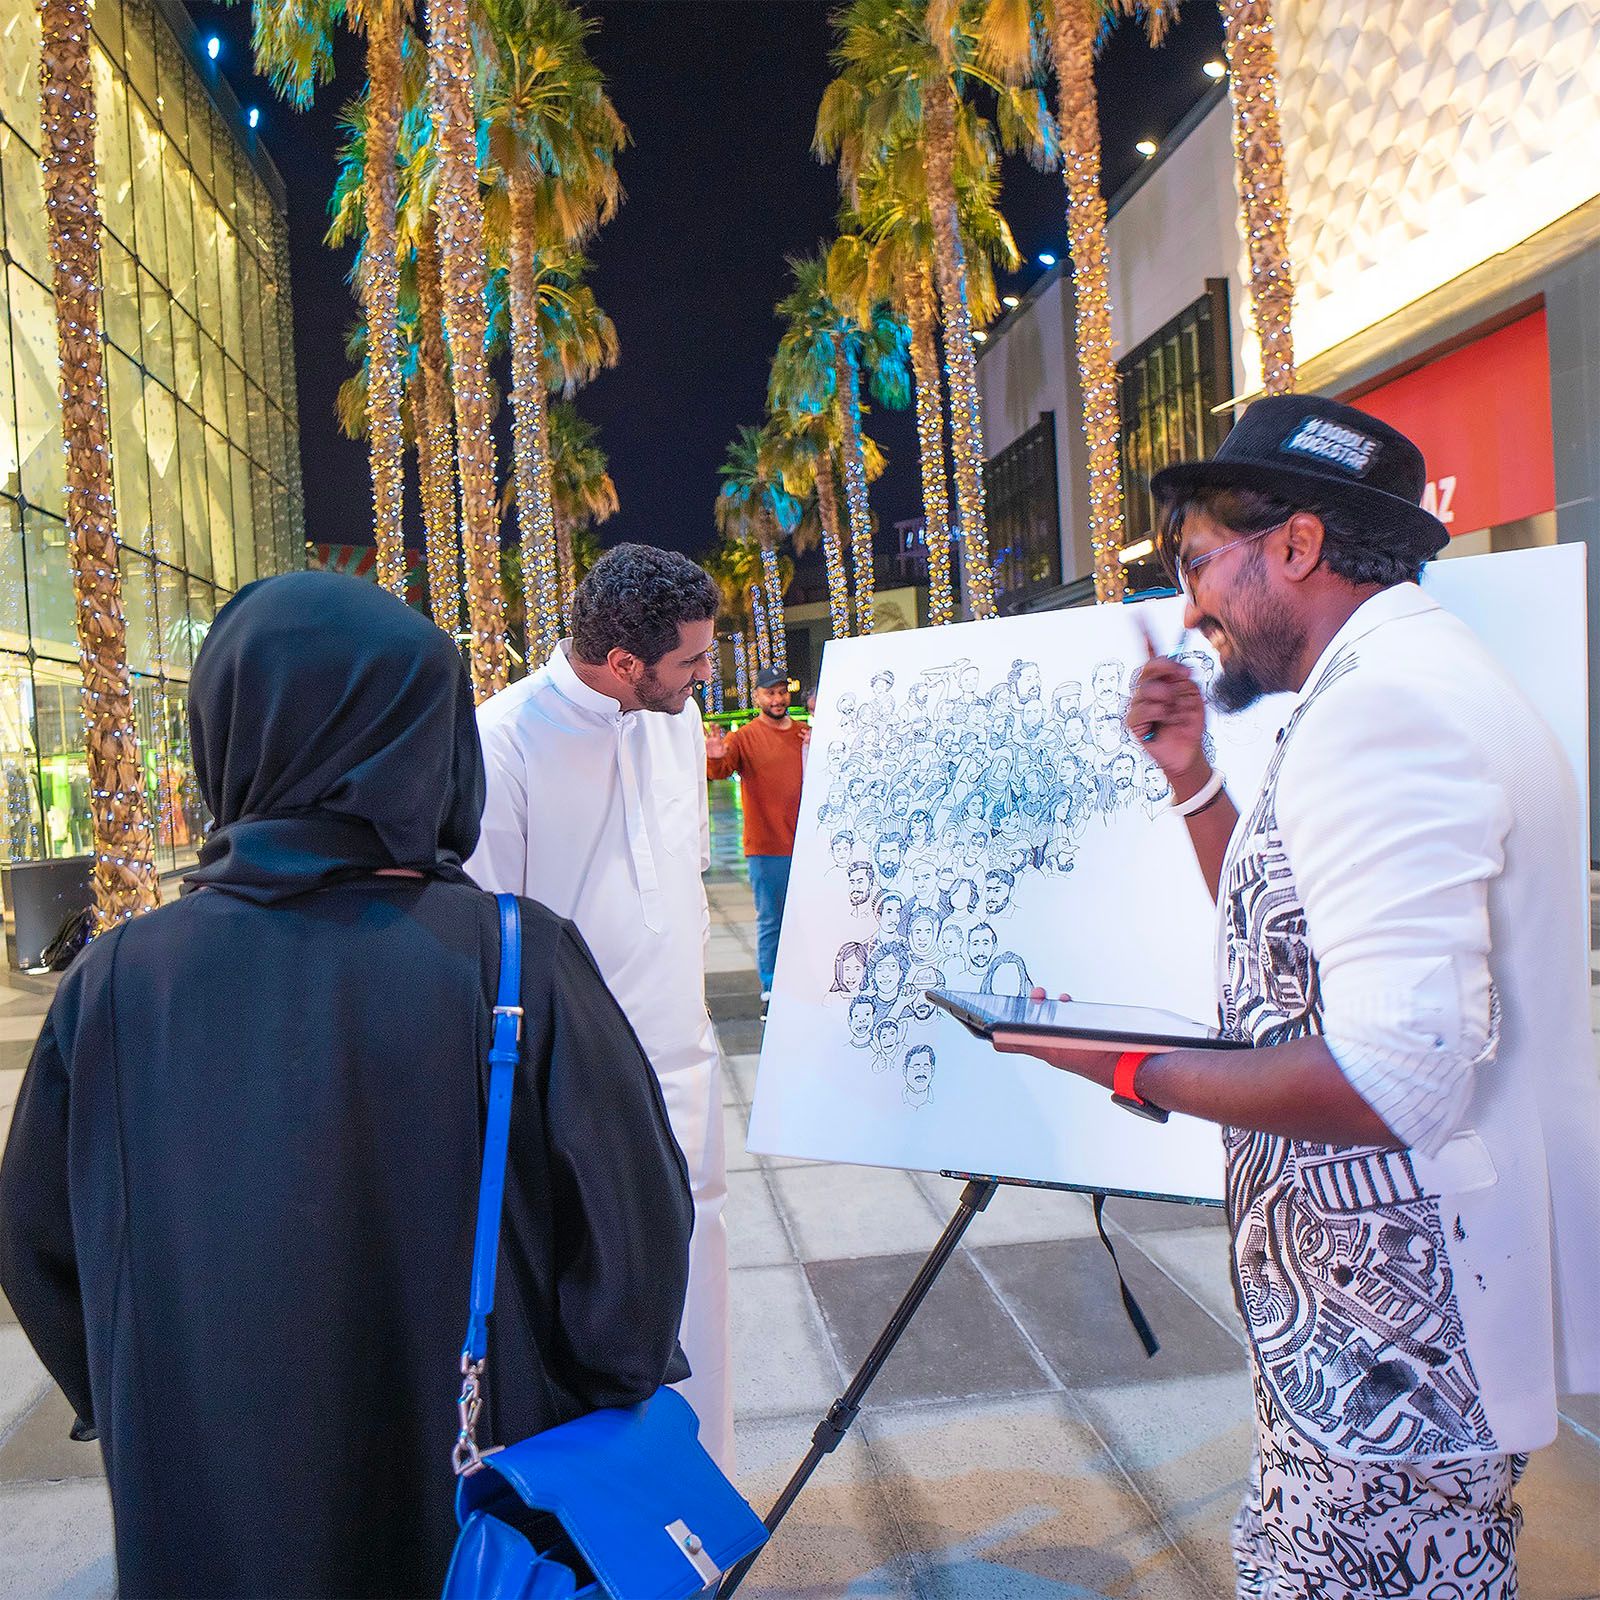 300+ faces to be painted on a single canvas by one person in Dubai, United Arab Emirates